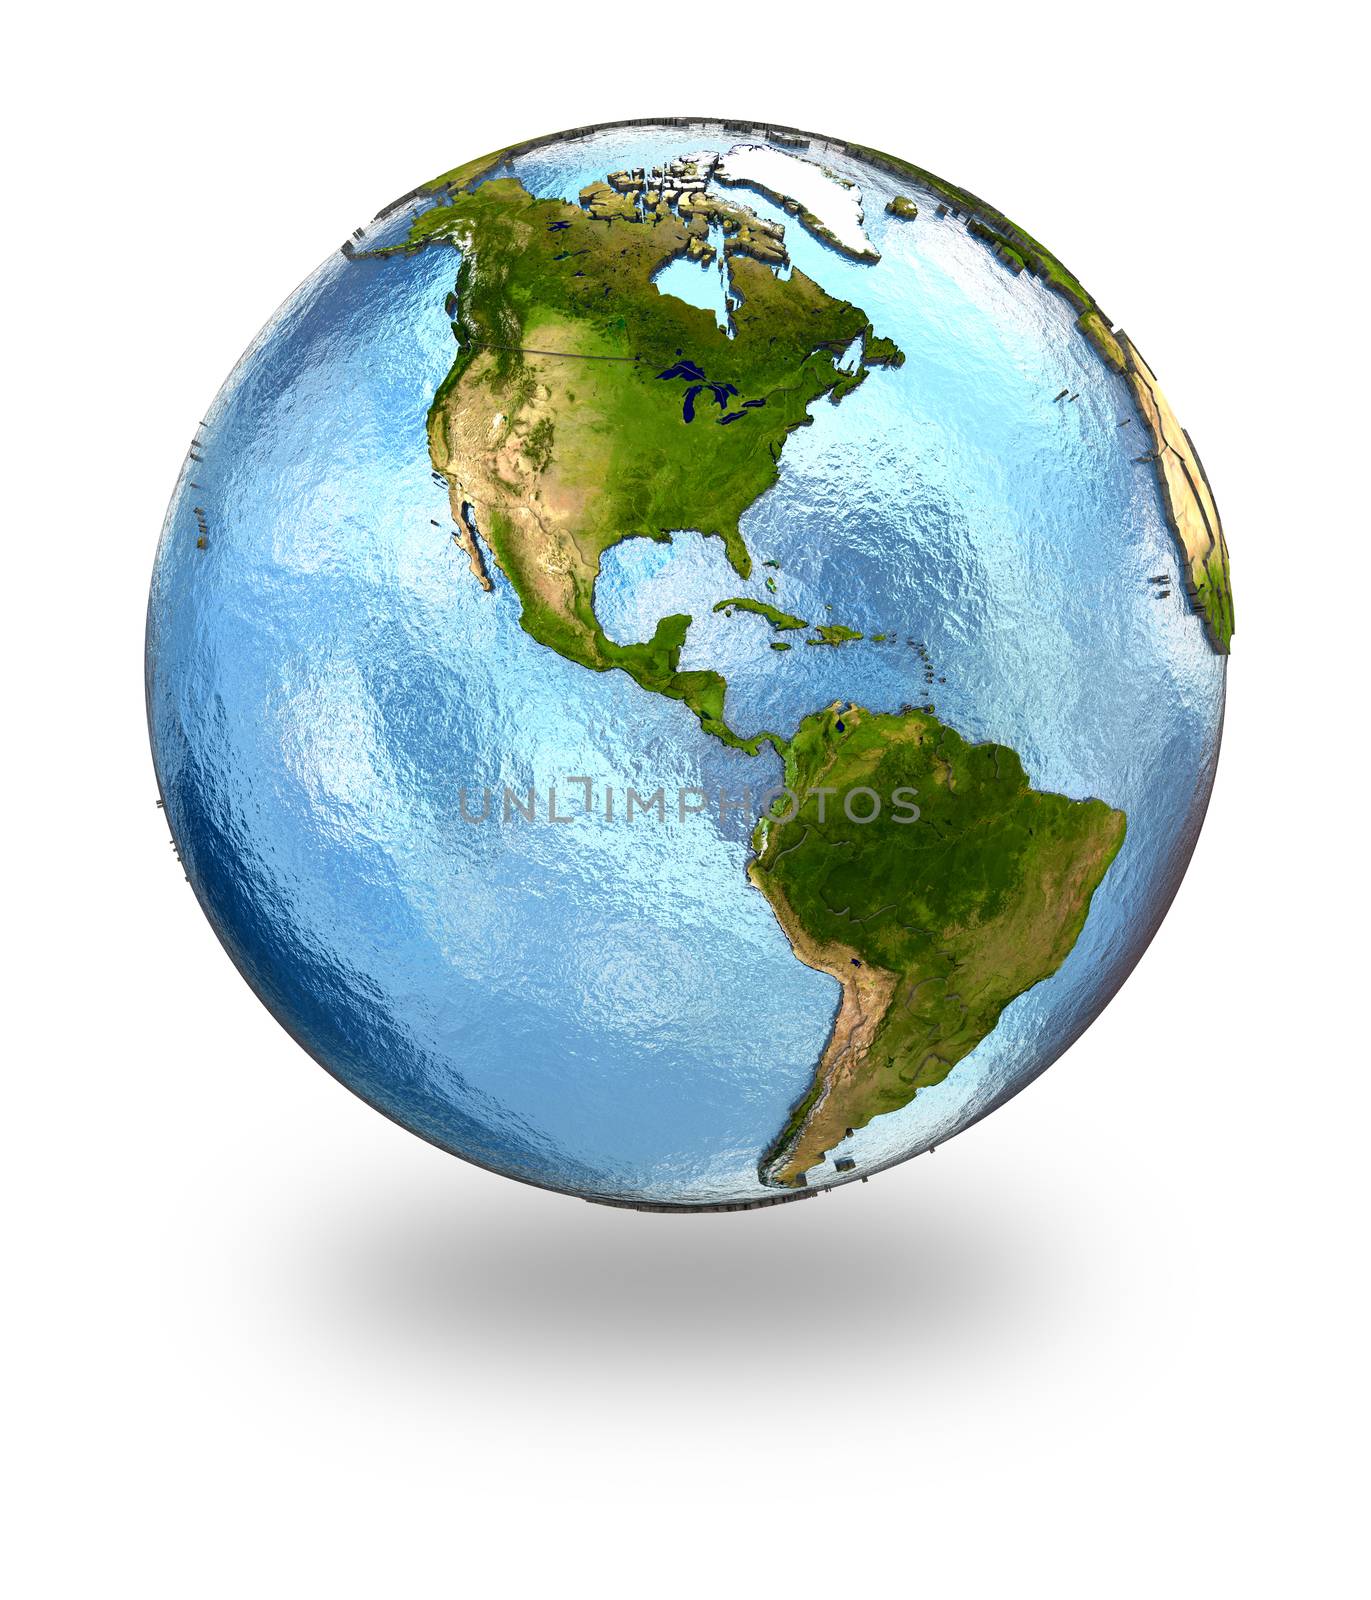 Highly detailed planet Earth with embossed continents and visible country borders featuring America. Isolated on white background. Elements of this image furnished by NASA.